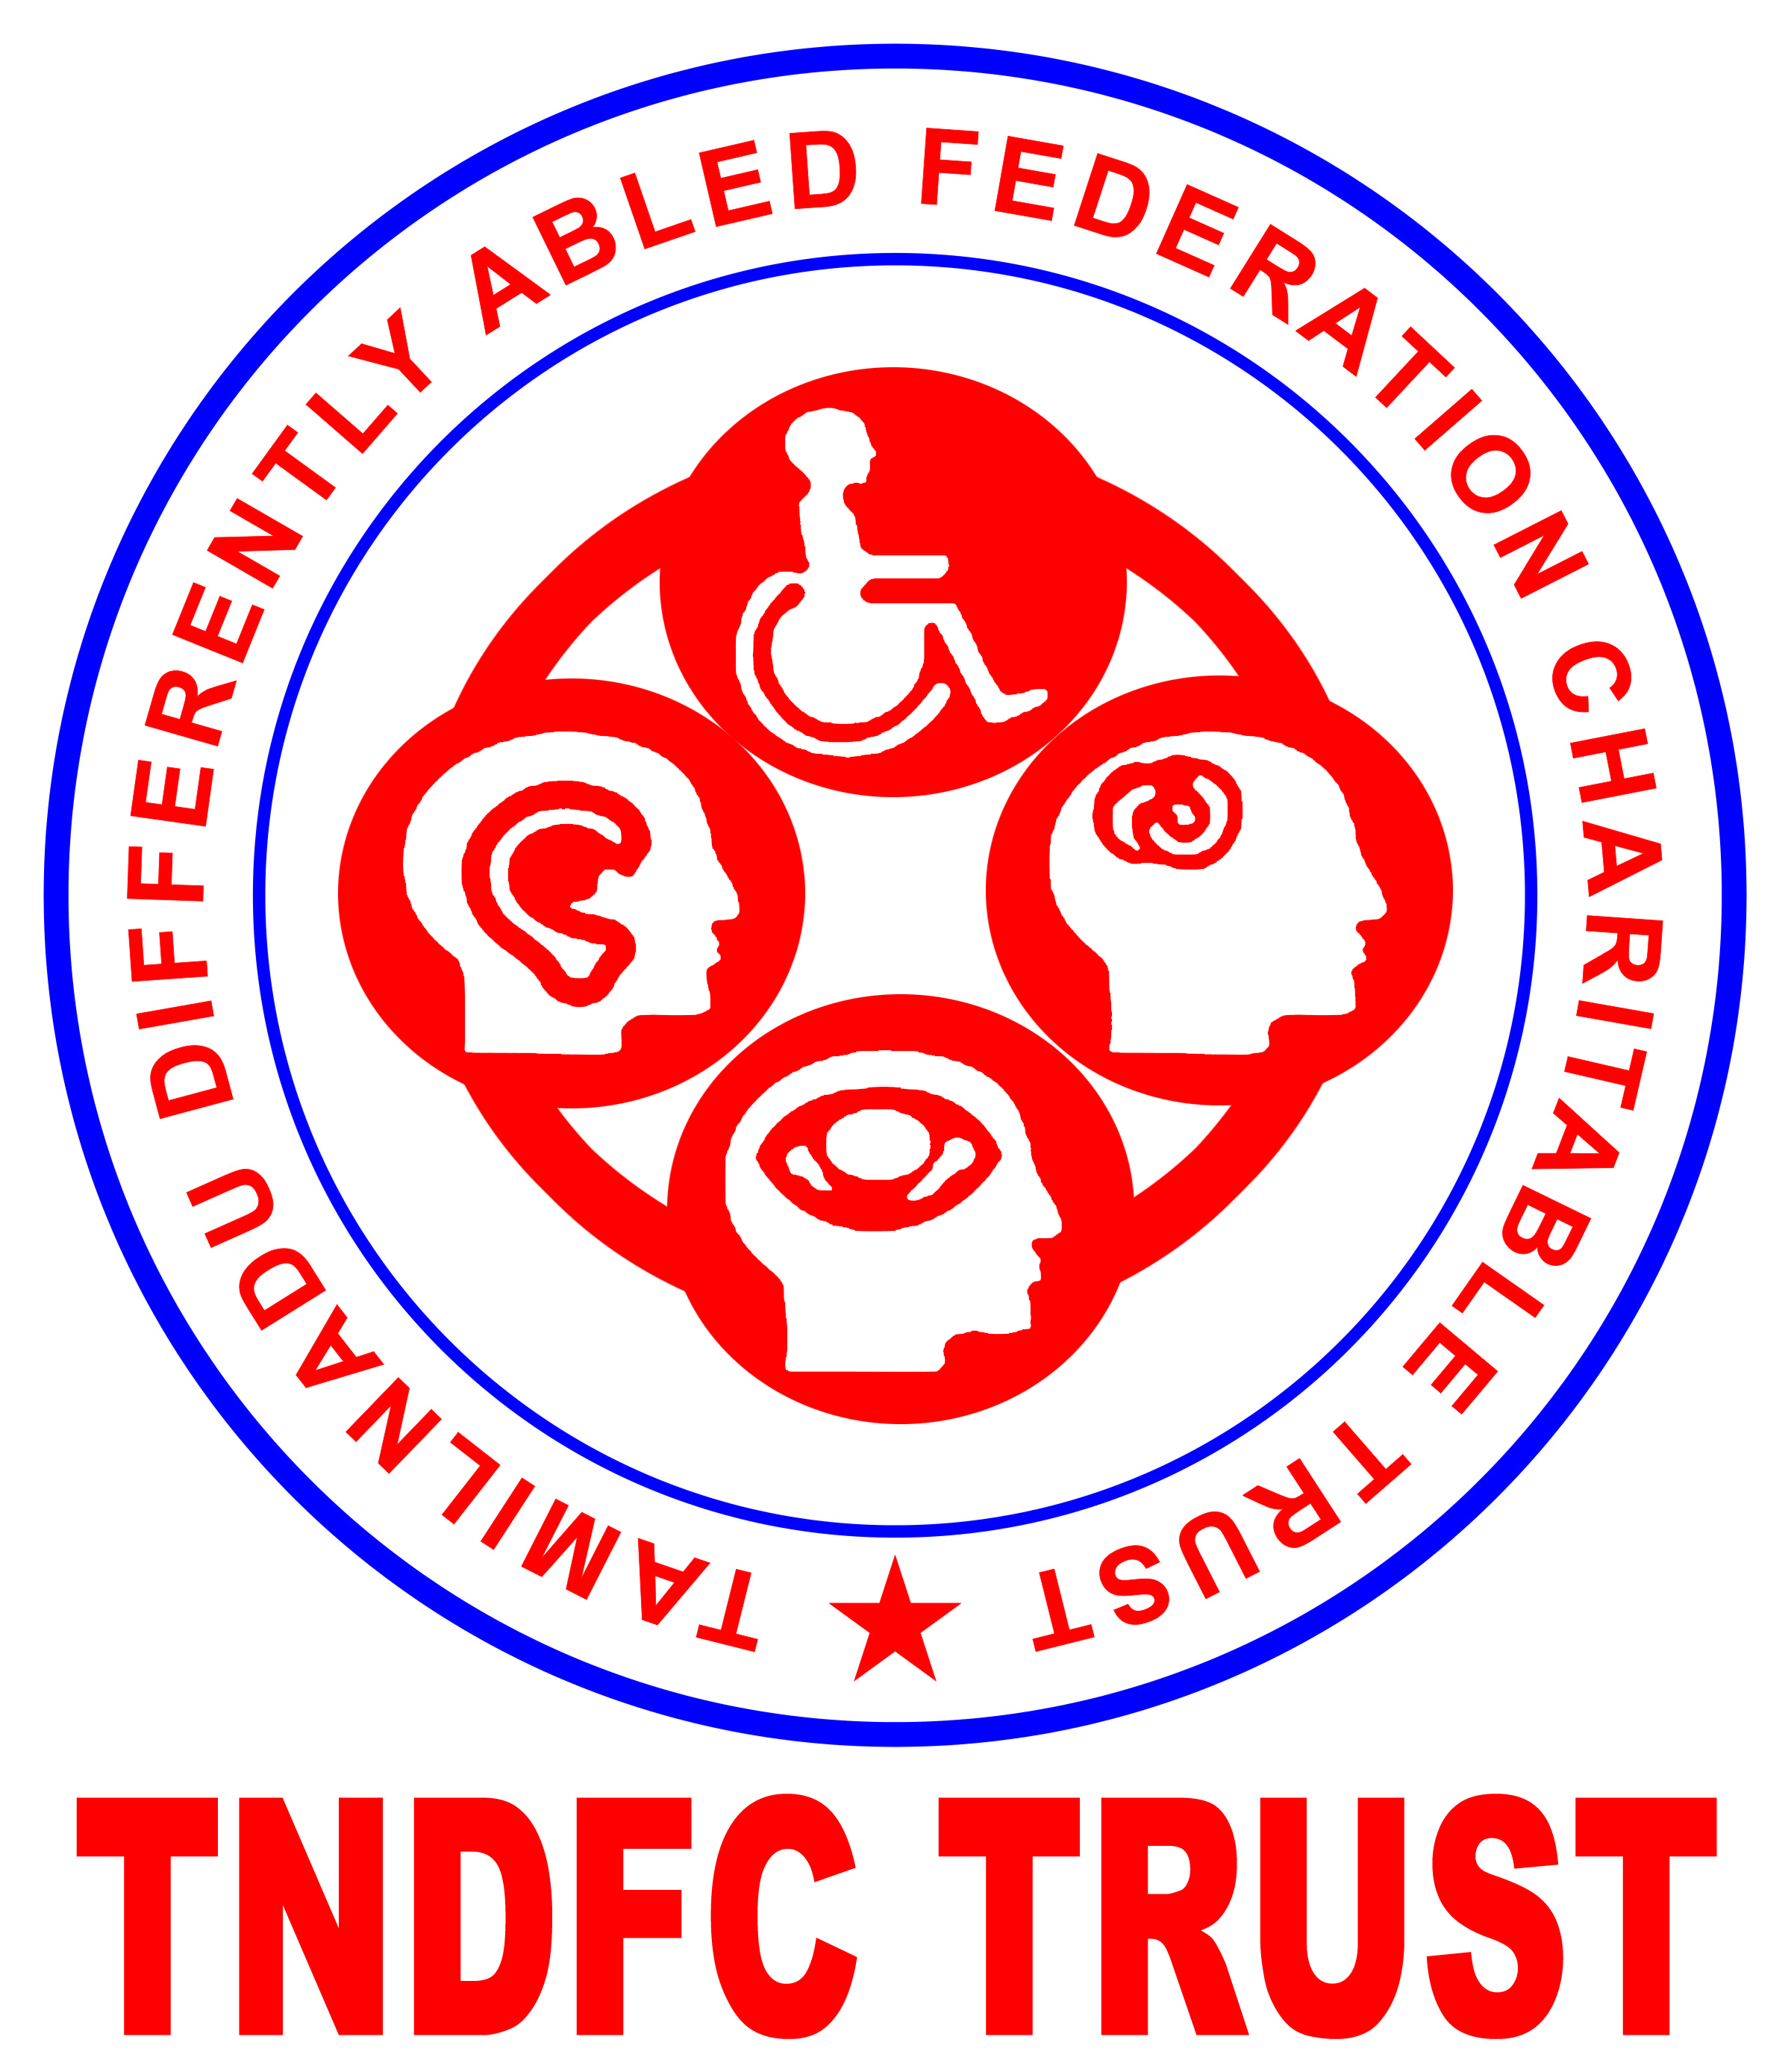 TAMILNADU DIFFERENTLY ABLED FEDERATION CHARITABLE TRUST